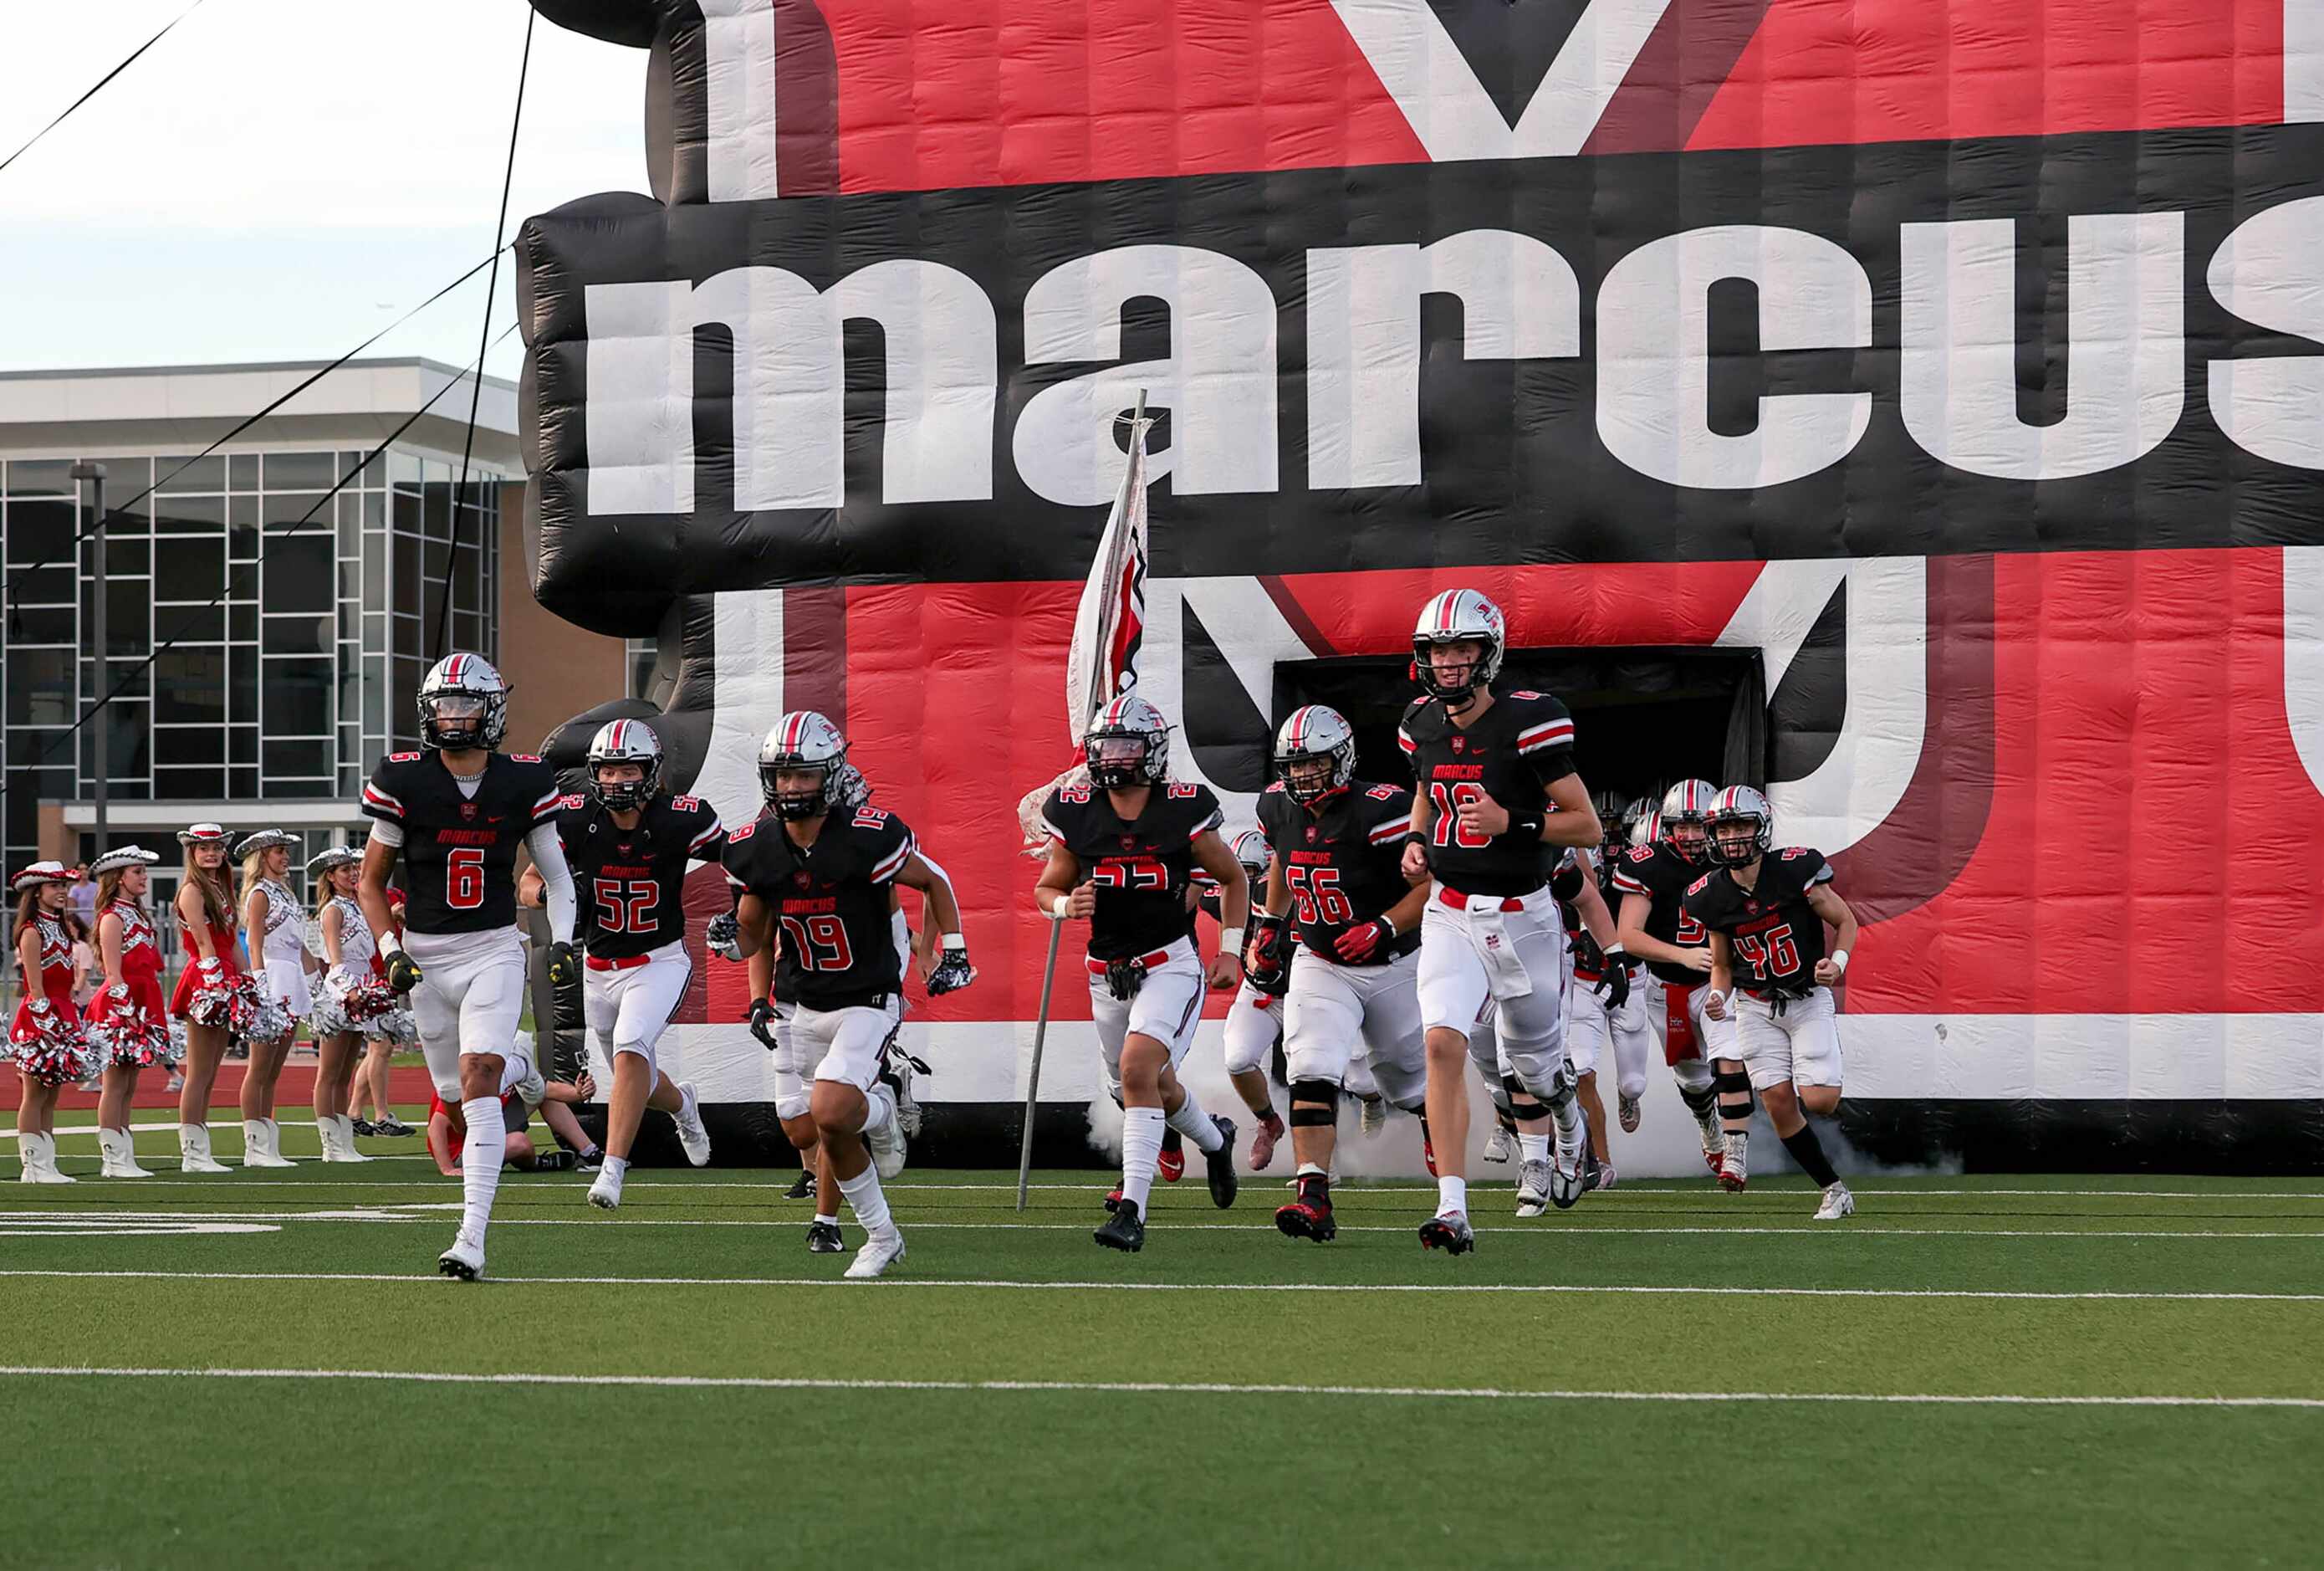 The Flower Mound Marcus Marauders enter the field to face Southlake Carroll in a high school...